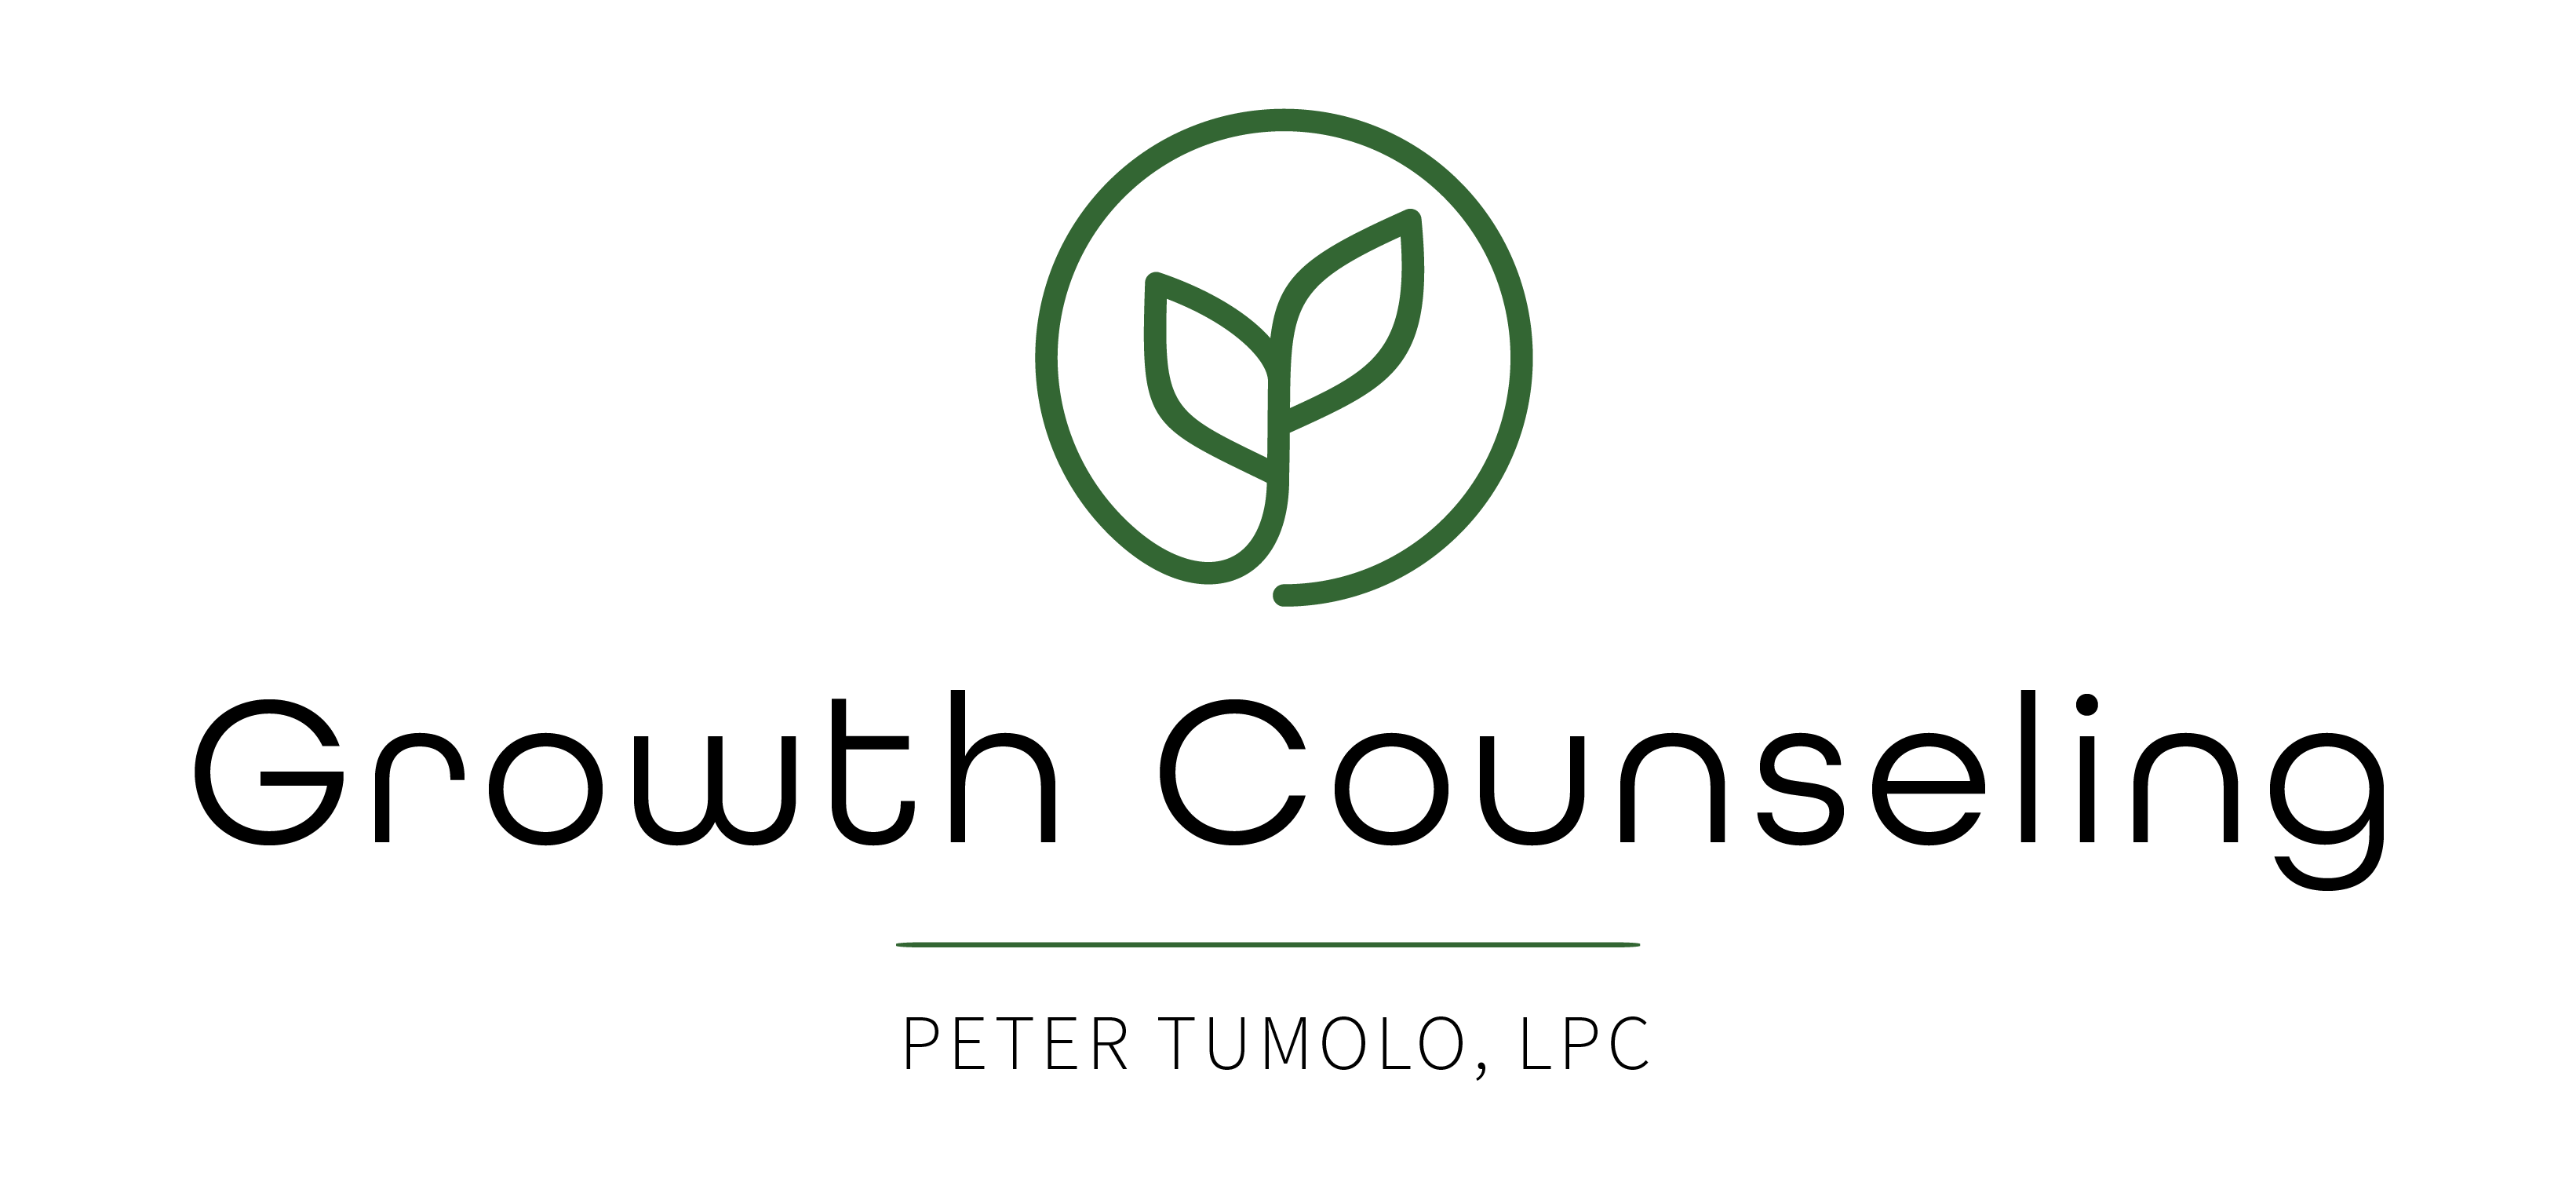 Growth Counseling - Peter Tumolo, LPC